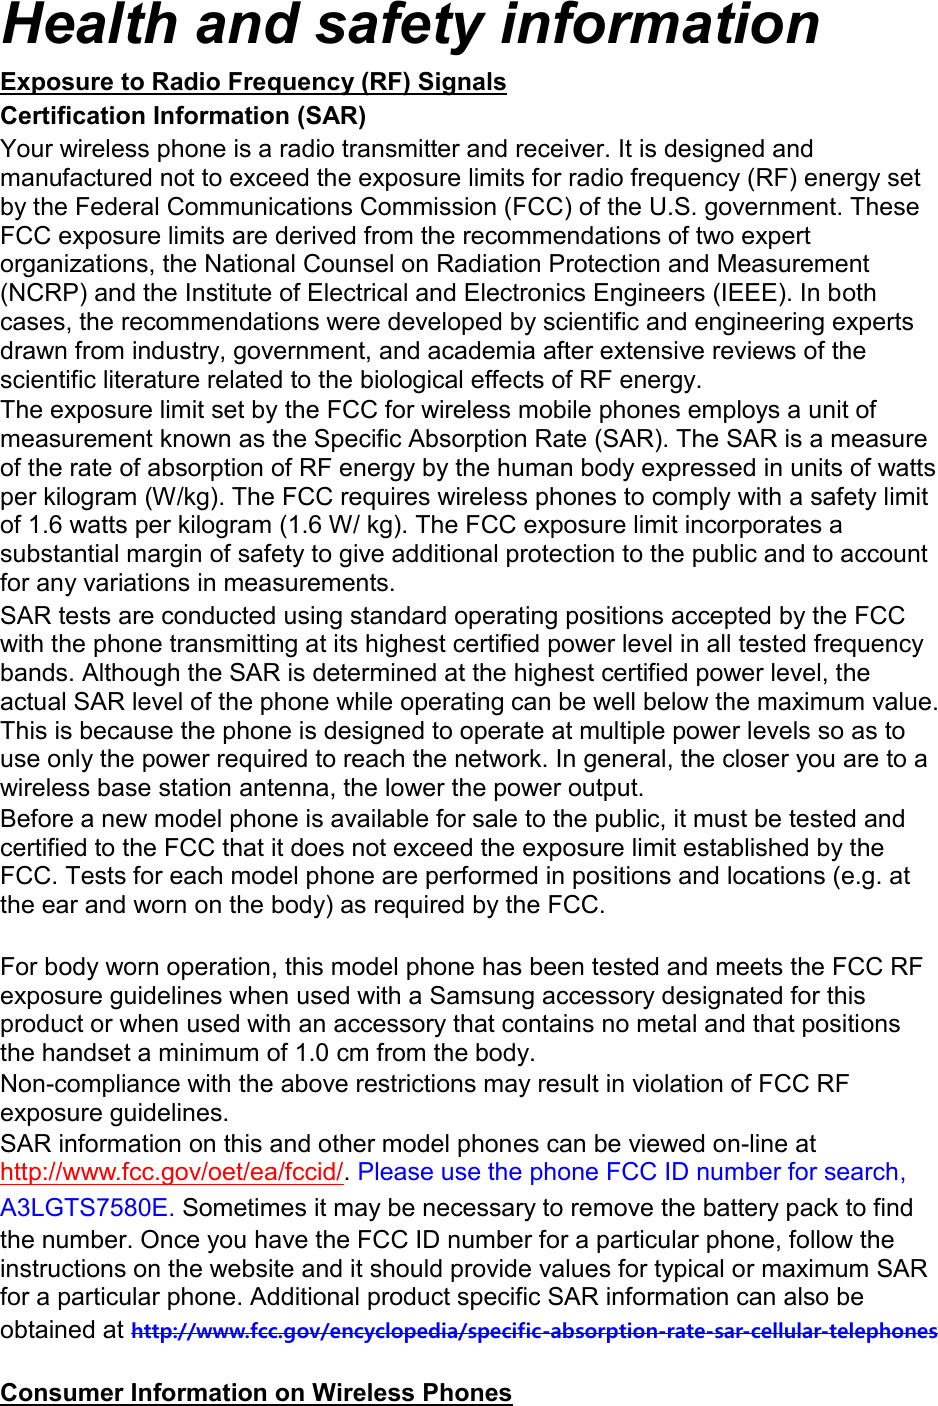 Health and safety information Exposure to Radio Frequency (RF) Signals Certification Information (SAR) Your wireless phone is a radio transmitter and receiver. It is designed and manufactured not to exceed the exposure limits for radio frequency (RF) energy set by the Federal Communications Commission (FCC) of the U.S. government. These FCC exposure limits are derived from the recommendations of two expert organizations, the National Counsel on Radiation Protection and Measurement (NCRP) and the Institute of Electrical and Electronics Engineers (IEEE). In both cases, the recommendations were developed by scientific and engineering experts drawn from industry, government, and academia after extensive reviews of the scientific literature related to the biological effects of RF energy. The exposure limit set by the FCC for wireless mobile phones employs a unit of measurement known as the Specific Absorption Rate (SAR). The SAR is a measure of the rate of absorption of RF energy by the human body expressed in units of watts per kilogram (W/kg). The FCC requires wireless phones to comply with a safety limit of 1.6 watts per kilogram (1.6 W/ kg). The FCC exposure limit incorporates a substantial margin of safety to give additional protection to the public and to account for any variations in measurements. SAR tests are conducted using standard operating positions accepted by the FCC with the phone transmitting at its highest certified power level in all tested frequency bands. Although the SAR is determined at the highest certified power level, the actual SAR level of the phone while operating can be well below the maximum value. This is because the phone is designed to operate at multiple power levels so as to use only the power required to reach the network. In general, the closer you are to a wireless base station antenna, the lower the power output. Before a new model phone is available for sale to the public, it must be tested and certified to the FCC that it does not exceed the exposure limit established by the FCC. Tests for each model phone are performed in positions and locations (e.g. at the ear and worn on the body) as required by the FCC.      For body worn operation, this model phone has been tested and meets the FCC RF exposure guidelines when used with a Samsung accessory designated for this product or when used with an accessory that contains no metal and that positions the handset a minimum of 1.0 cm from the body.   Non-compliance with the above restrictions may result in violation of FCC RF exposure guidelines. SAR information on this and other model phones can be viewed on-line at http://www.fcc.gov/oet/ea/fccid/. Please use the phone FCC ID number for search, A3LGTS7580E. Sometimes it may be necessary to remove the battery pack to find the number. Once you have the FCC ID number for a particular phone, follow the instructions on the website and it should provide values for typical or maximum SAR for a particular phone. Additional product specific SAR information can also be obtained at http://www.fcc.gov/encyclopedia/specific-absorption-rate-sar-cellular-telephones  Consumer Information on Wireless Phones 